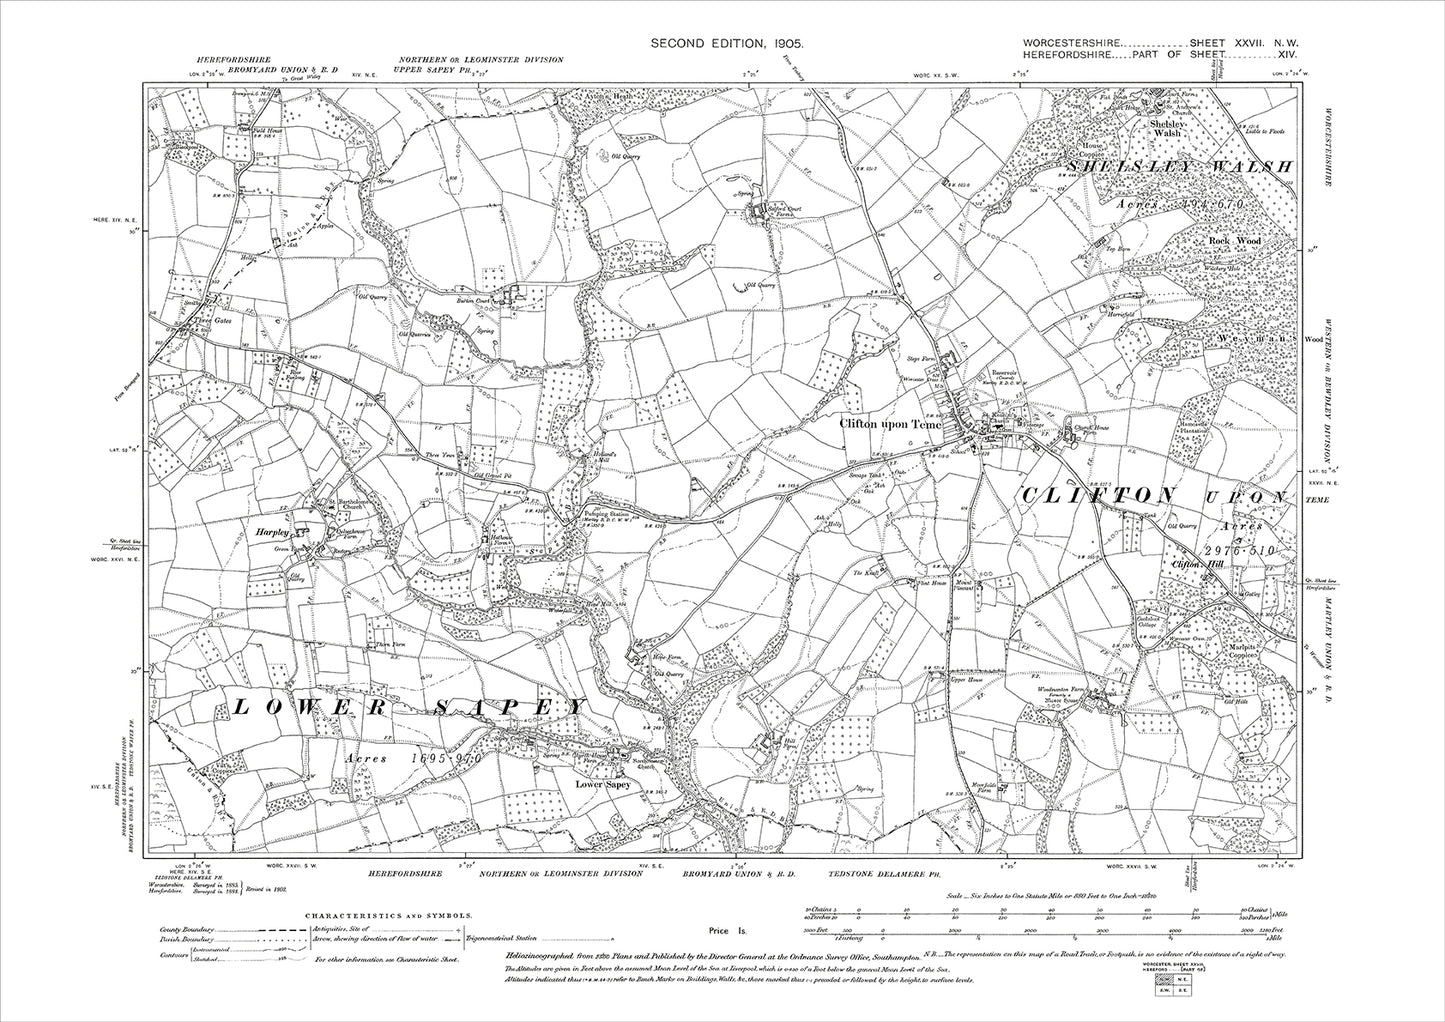 Clifton upon Teme, Lower Sapey, Harpley, old map Worcestershire 1905: 27NW